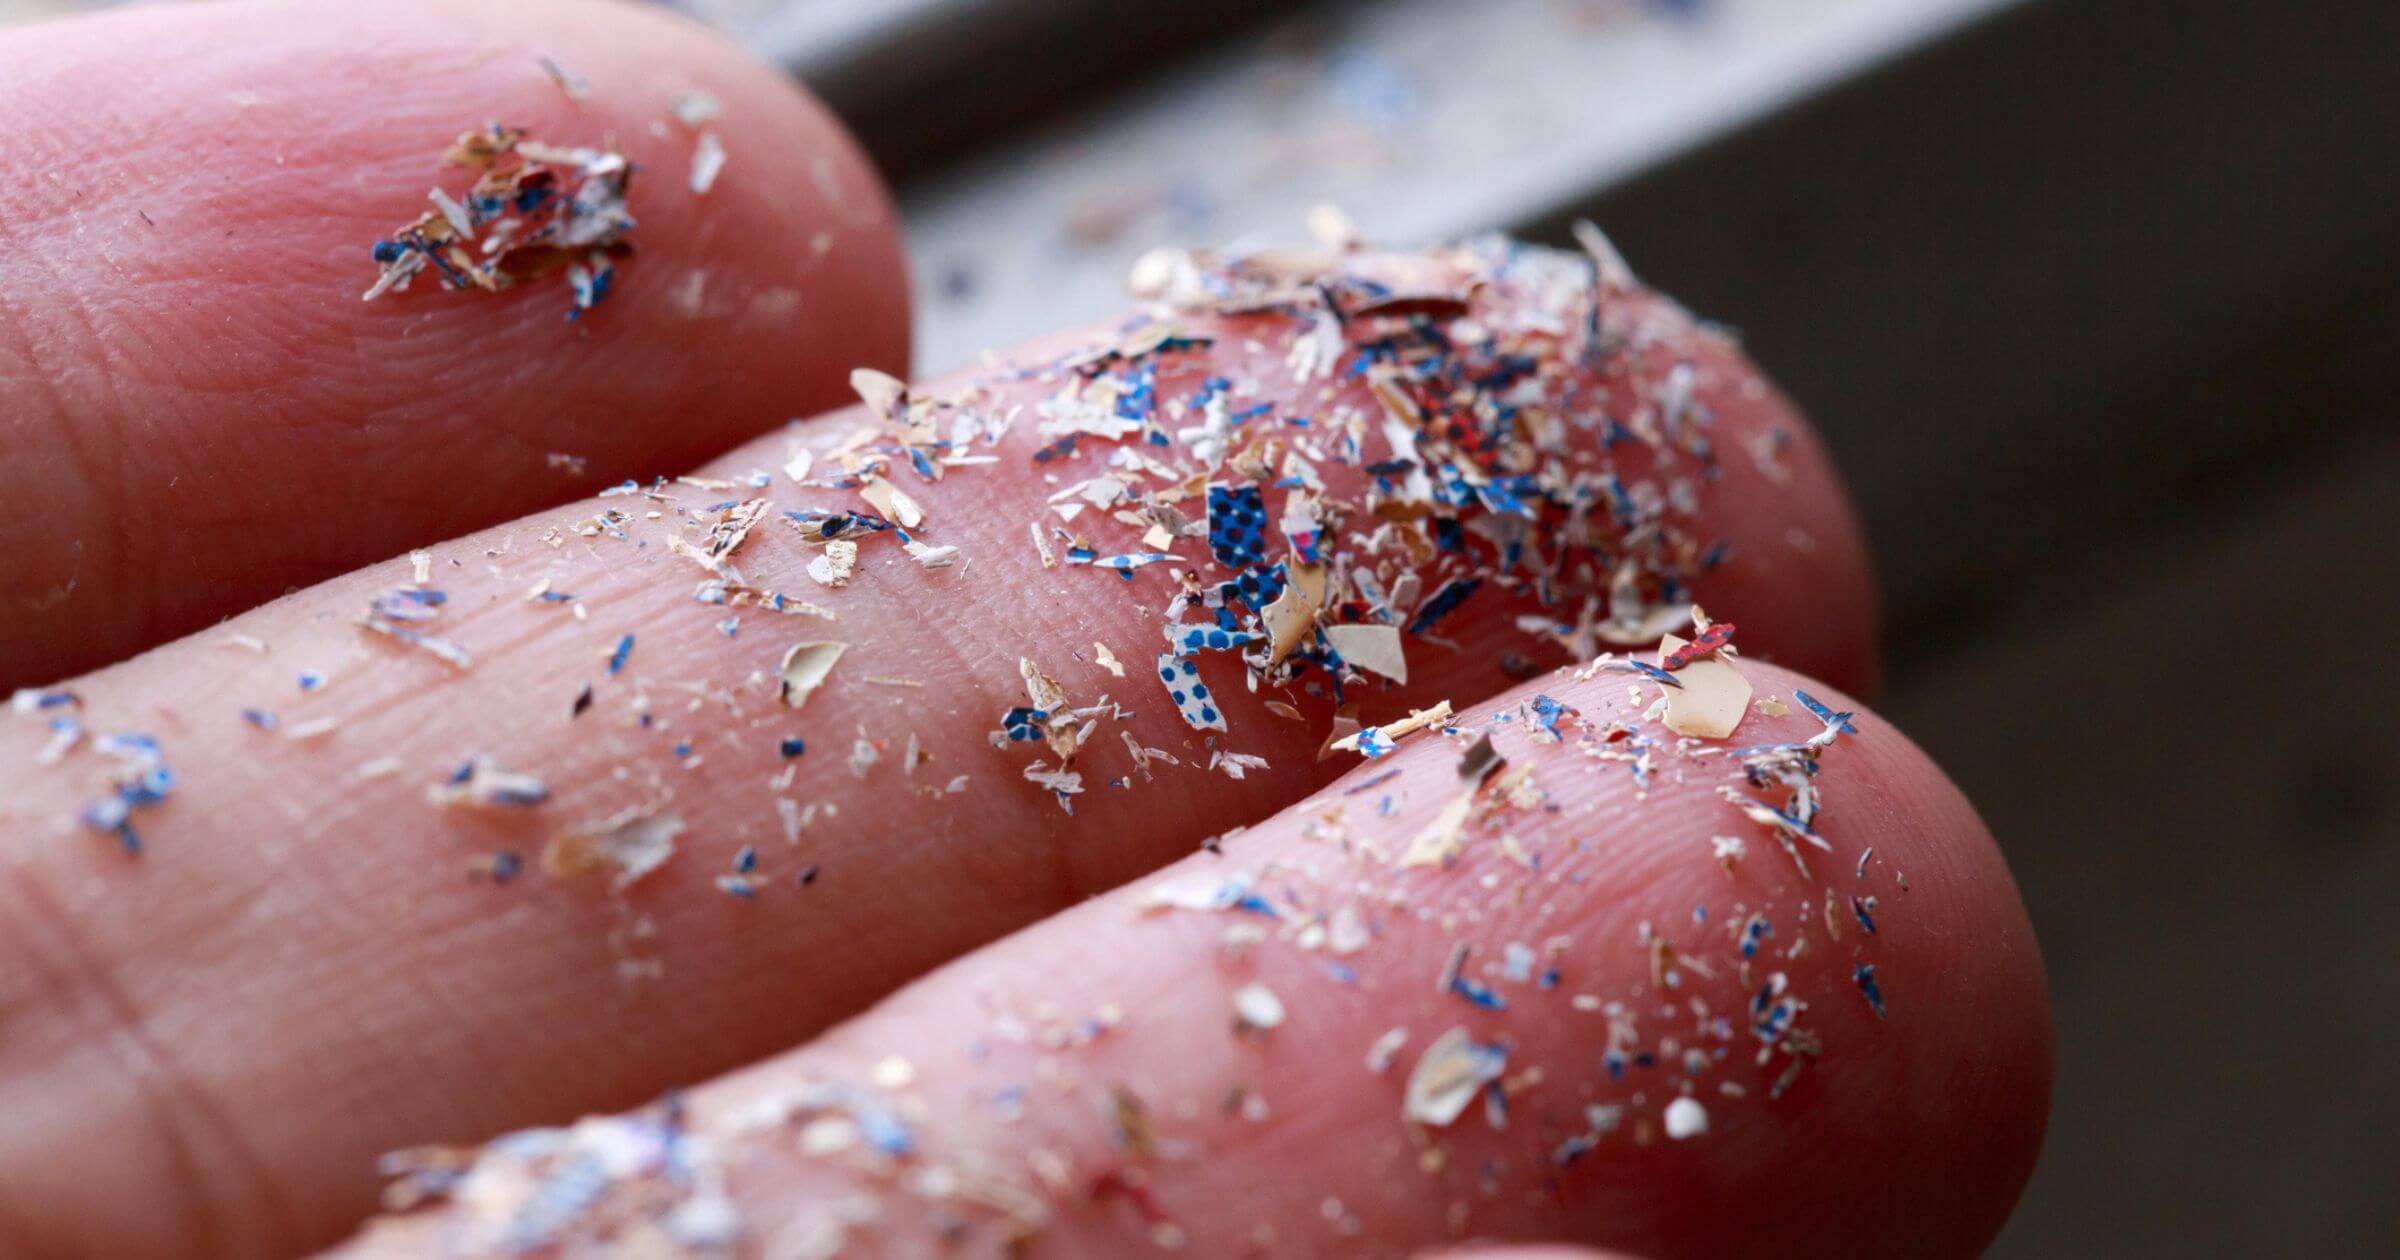 A close-up of lots of microplastics on the end of someones fingertips